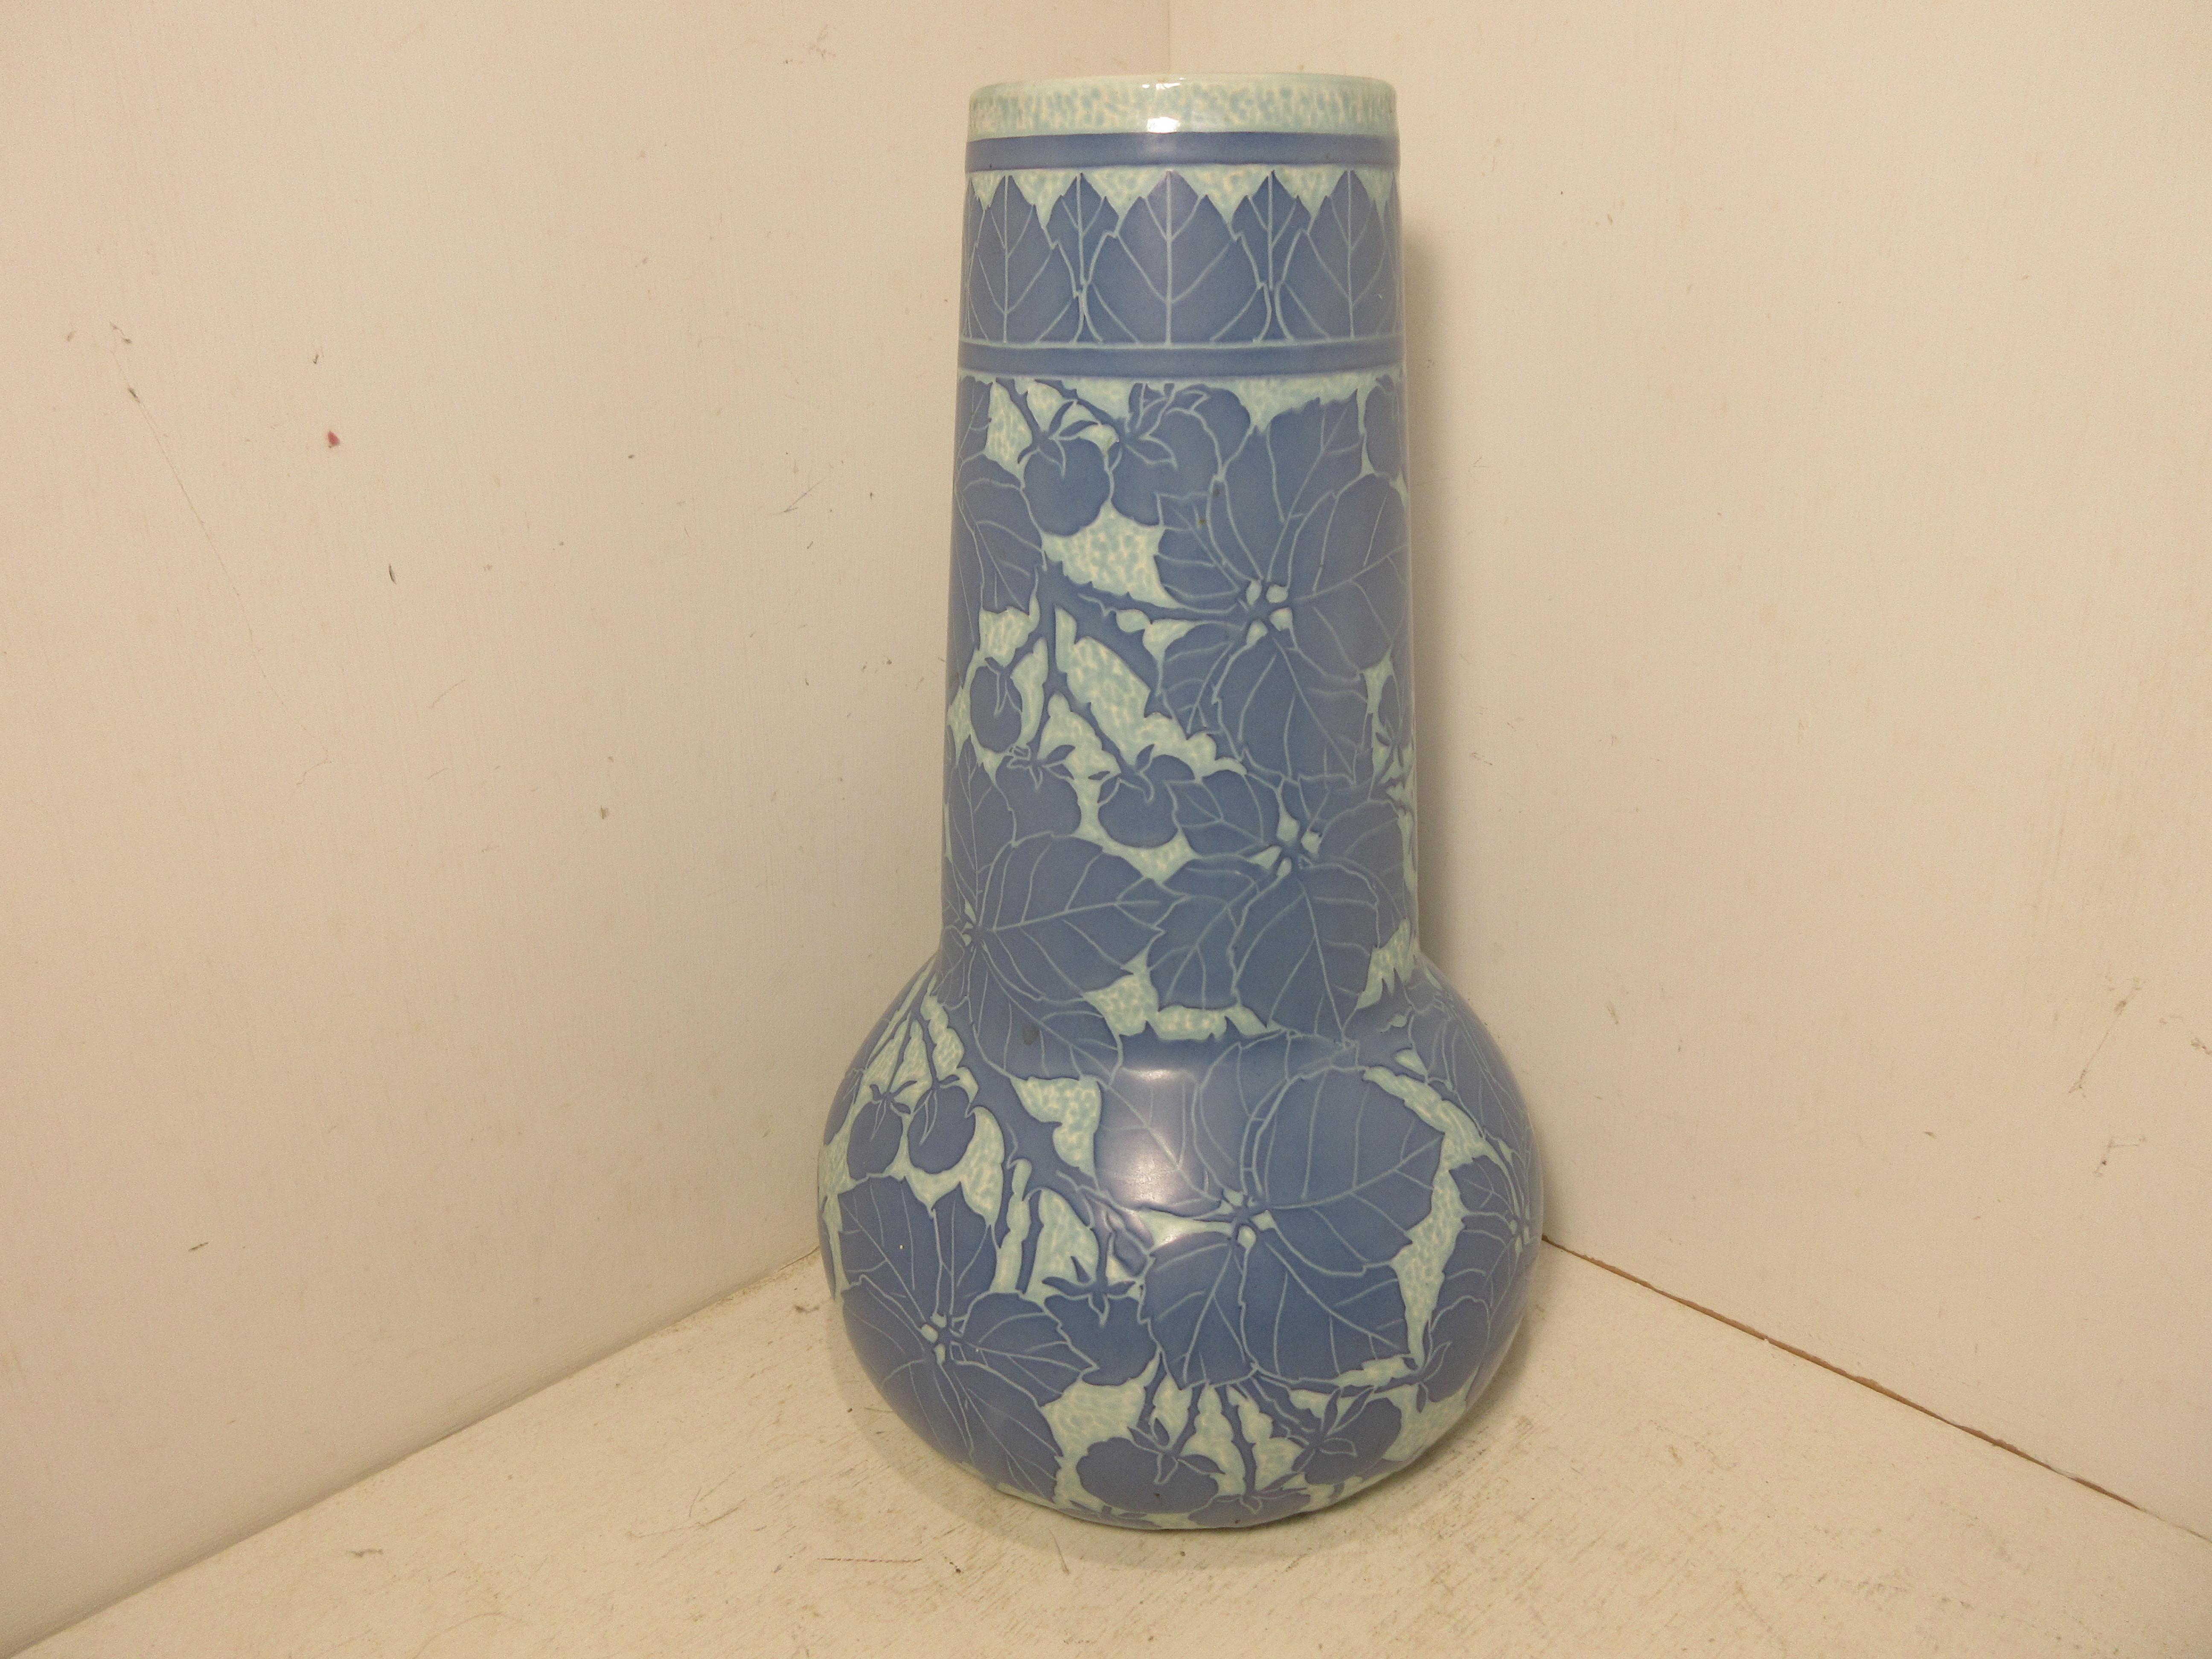 This is a handmade, 1 off Sgraffito vase made by the Swedish ceramic artist Josef Ekberg in 1917. he was one of Sweden's Top Ceramic artist at the time. He started working at the Gustavsberg foundry in 1898 till his death in 1945. His works are